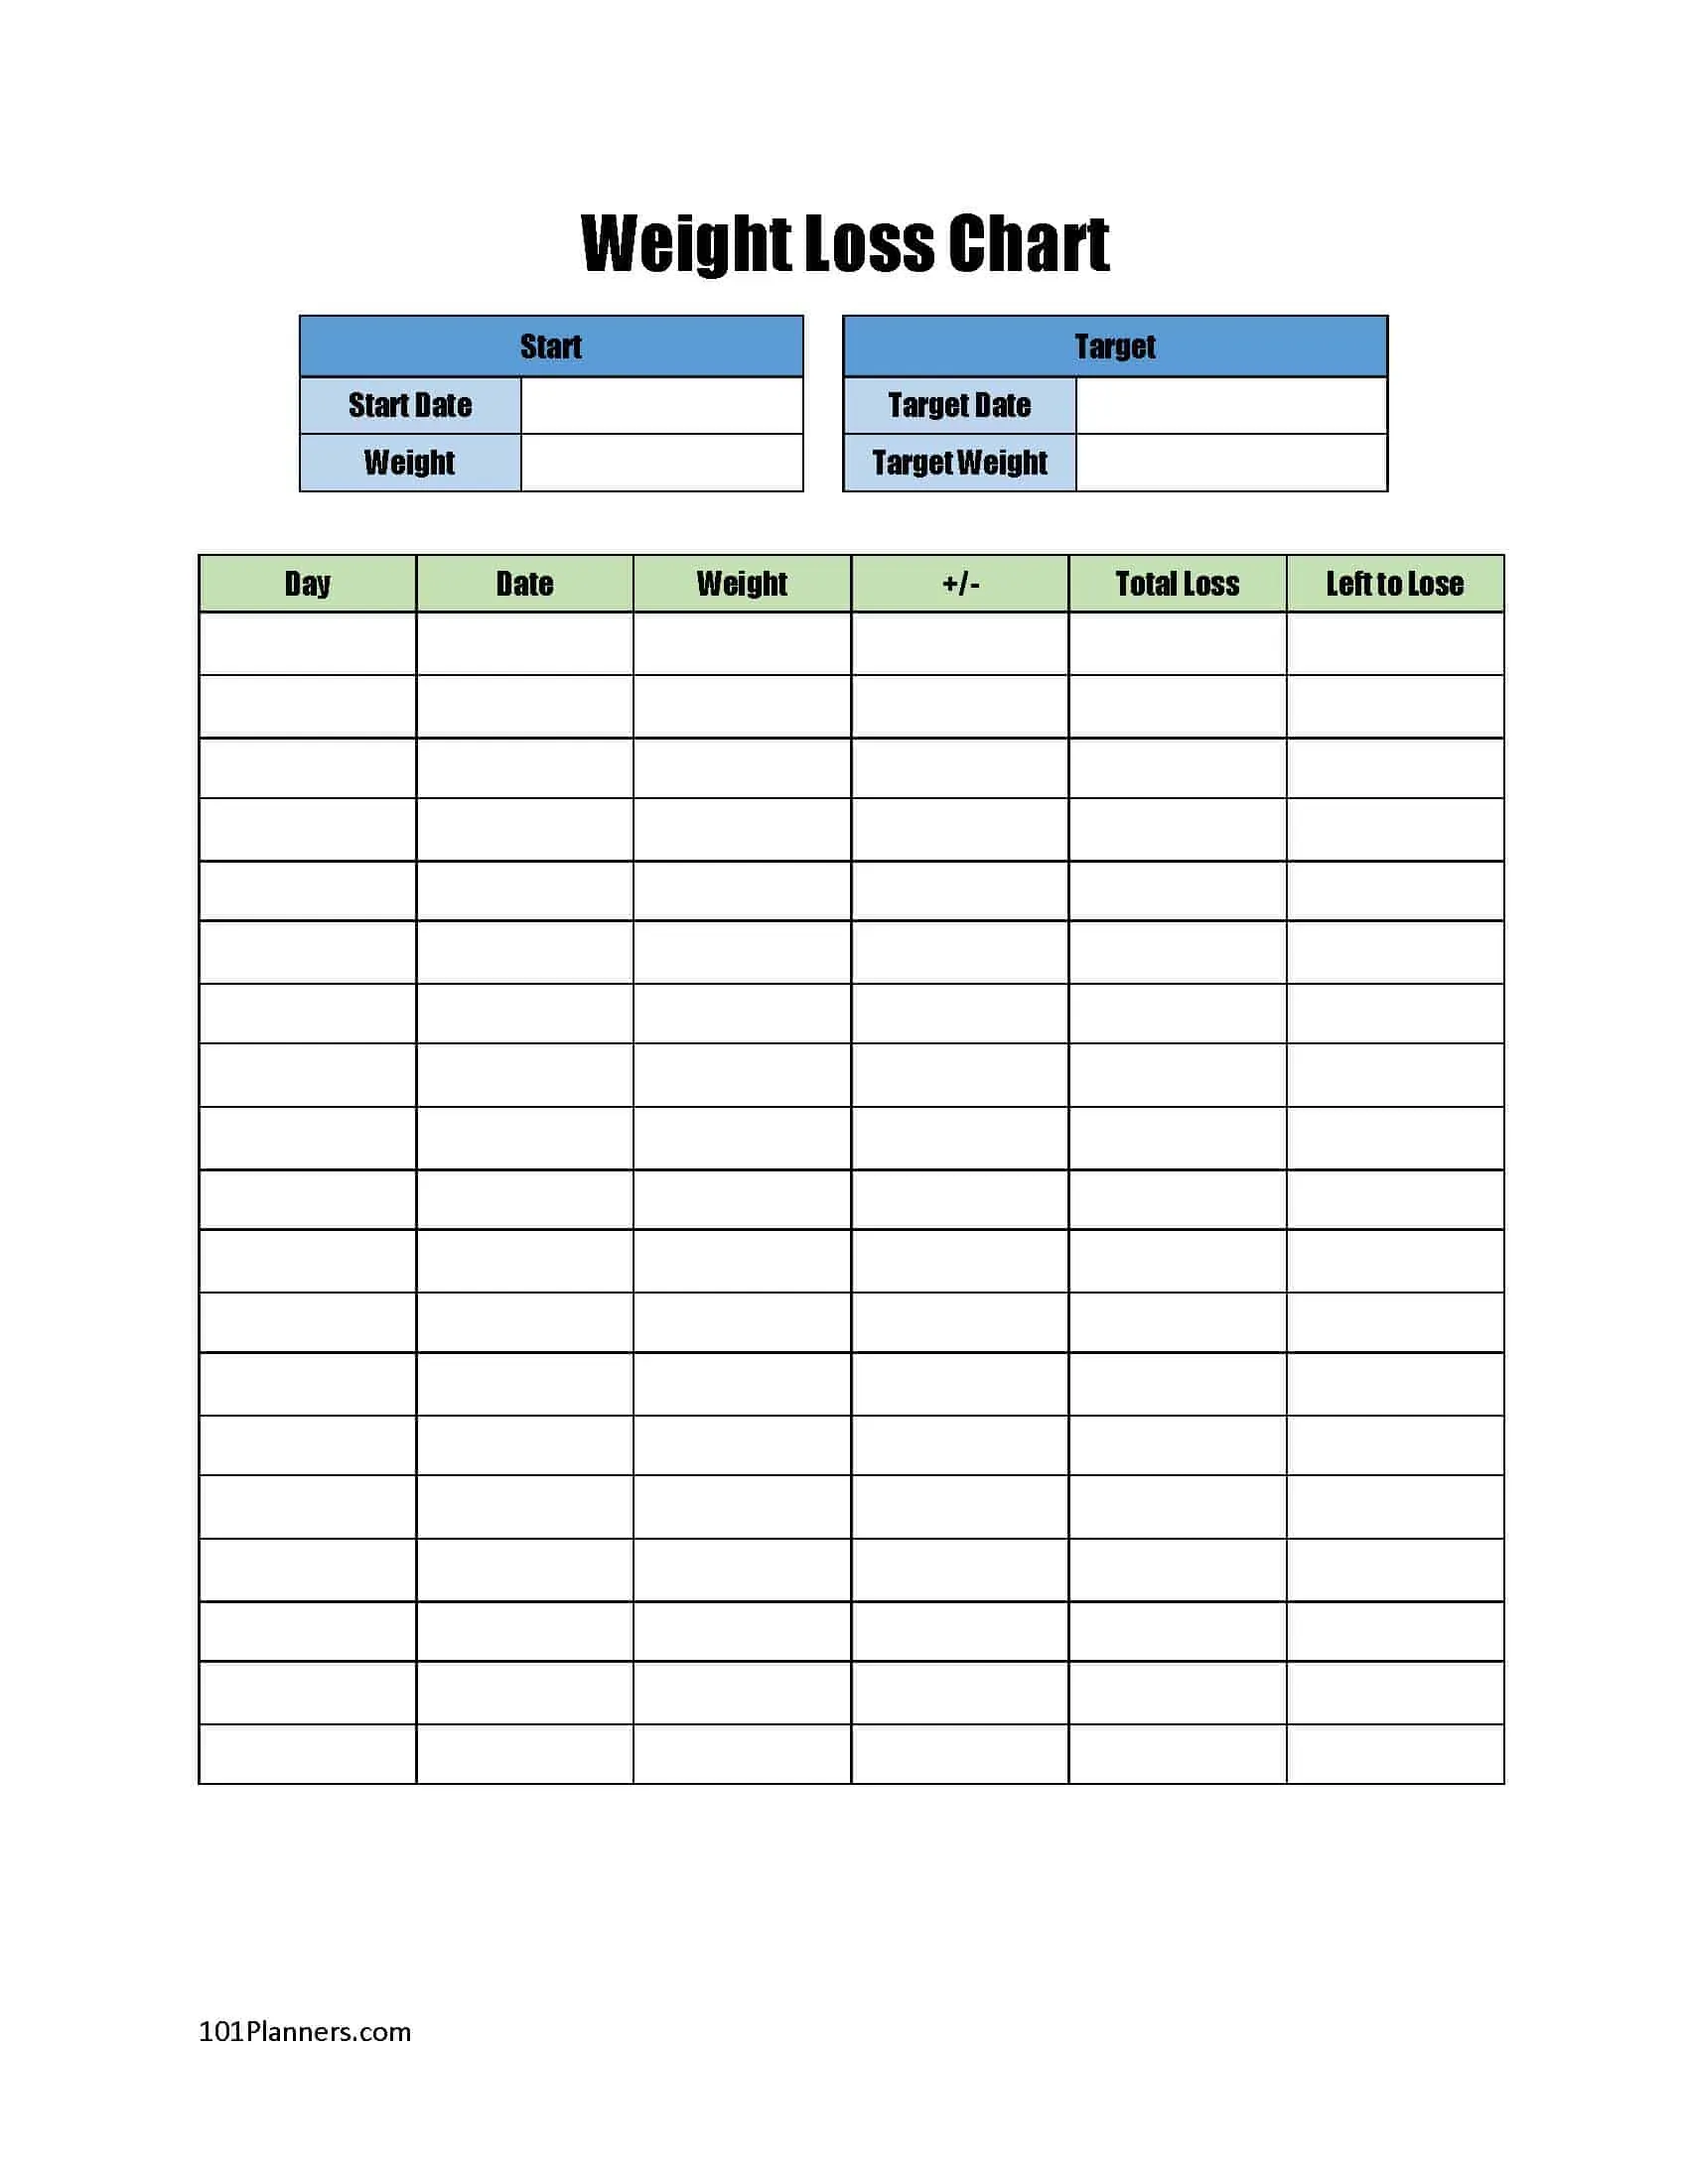 Free Printable Body Measurement Charts in PDF, PNG, and JPG Formats · InkPx